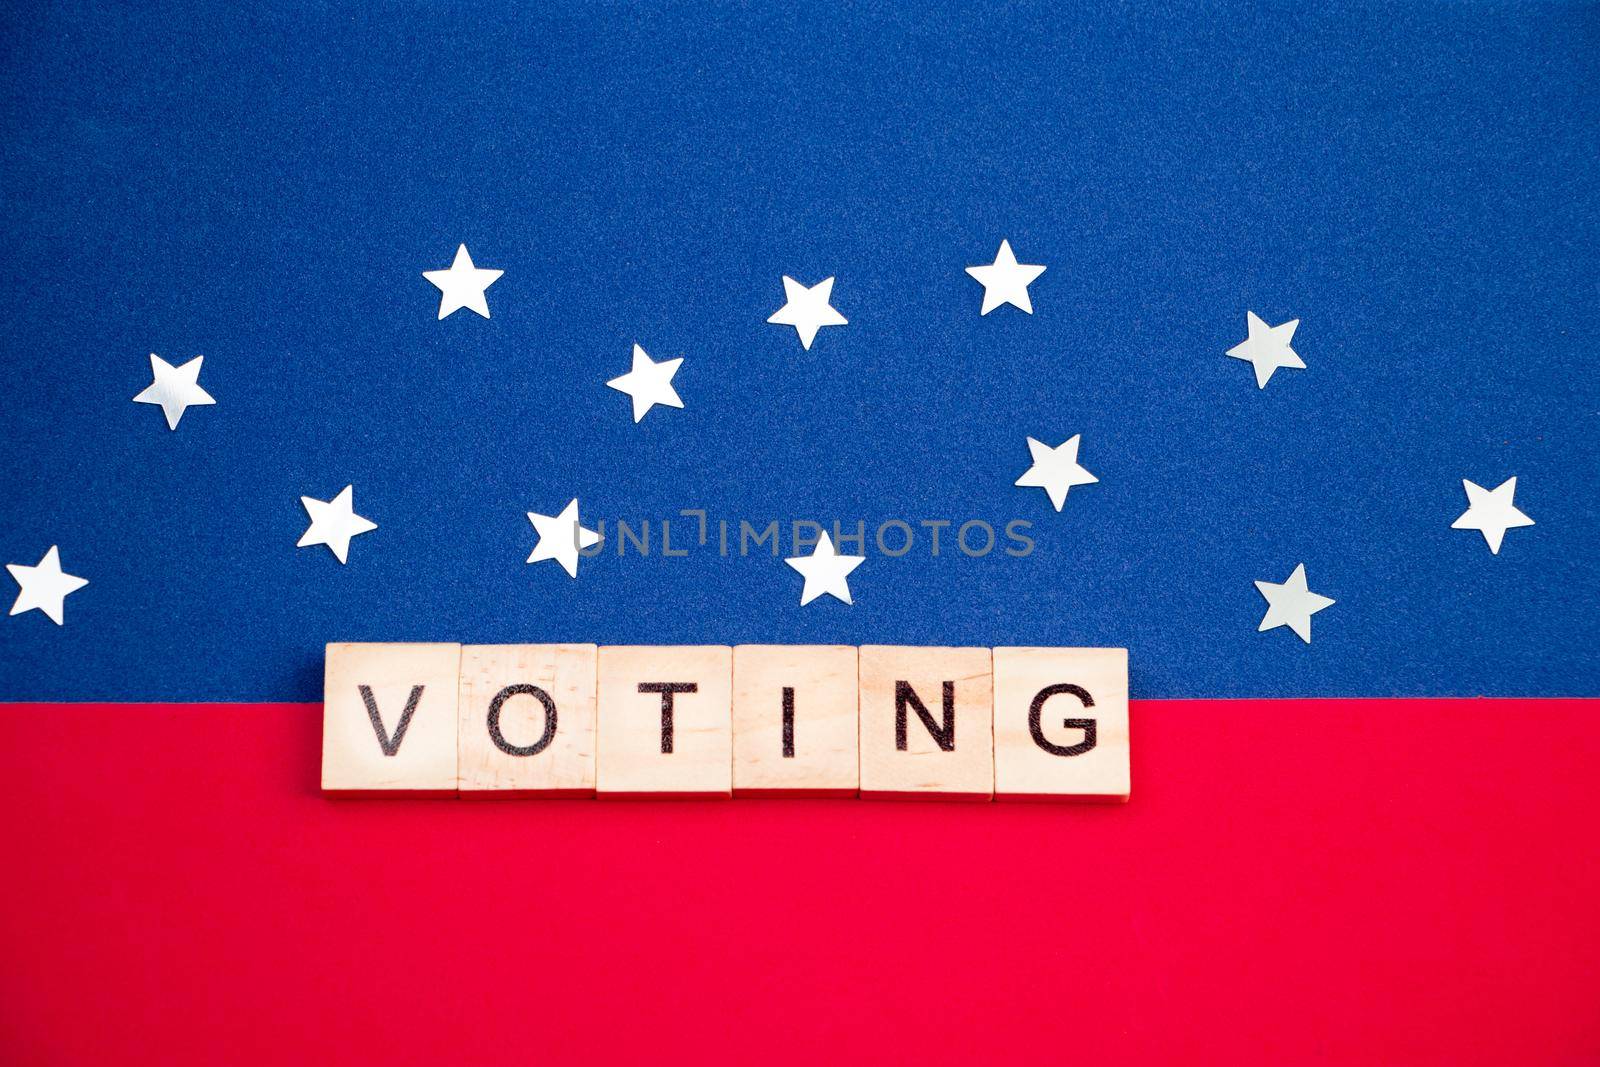 USA Election Day - November 3, 2020. Voting concept. Sign on a red and blue background.